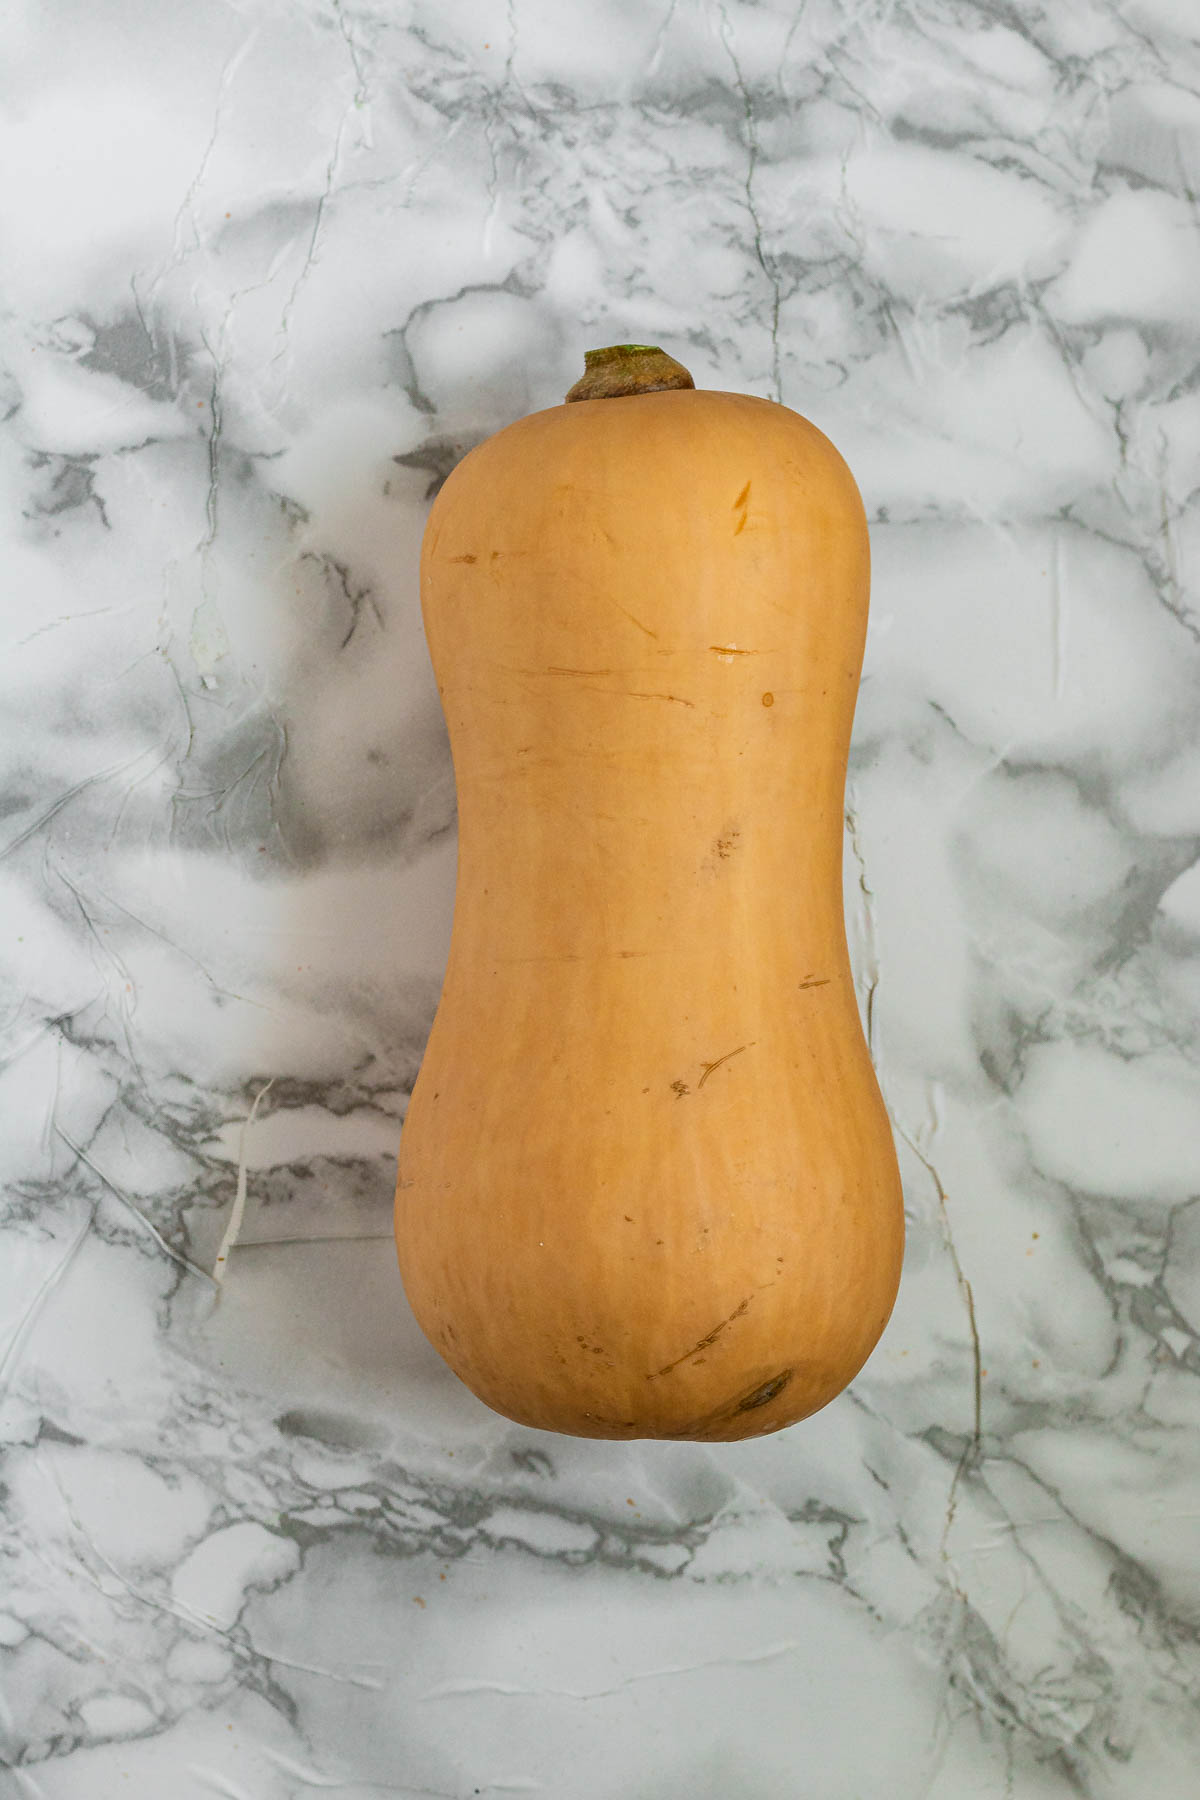 A whole butternut squash on a marble counter.